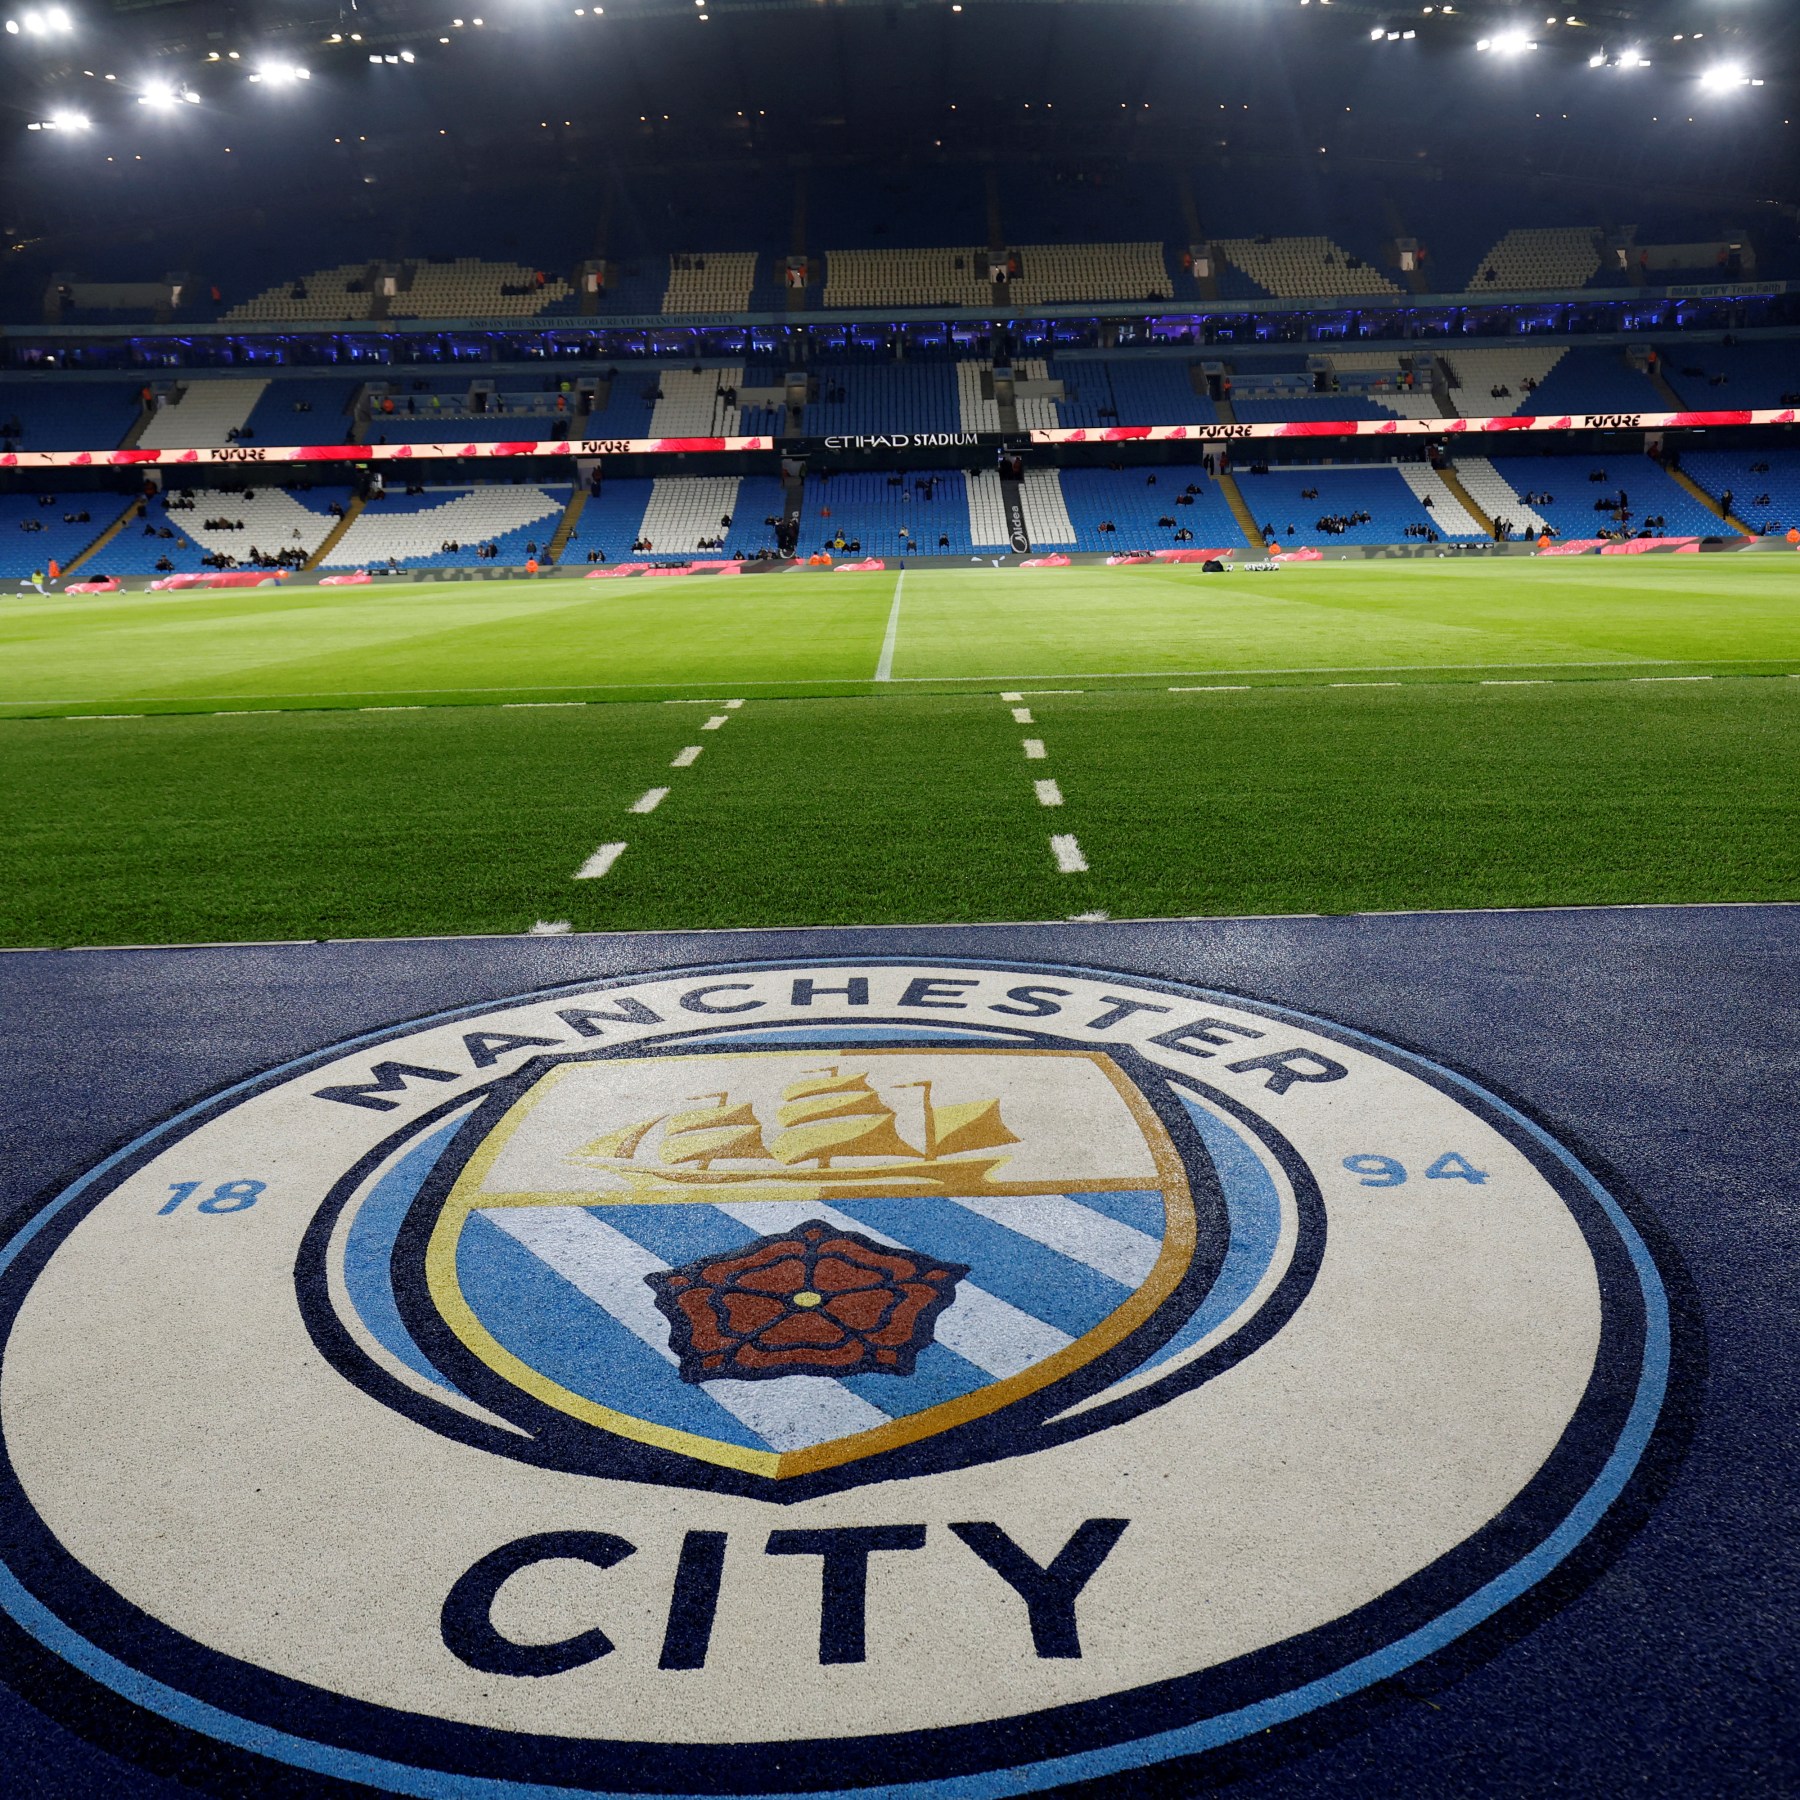 City Football Group acquires majority stake in Italian club